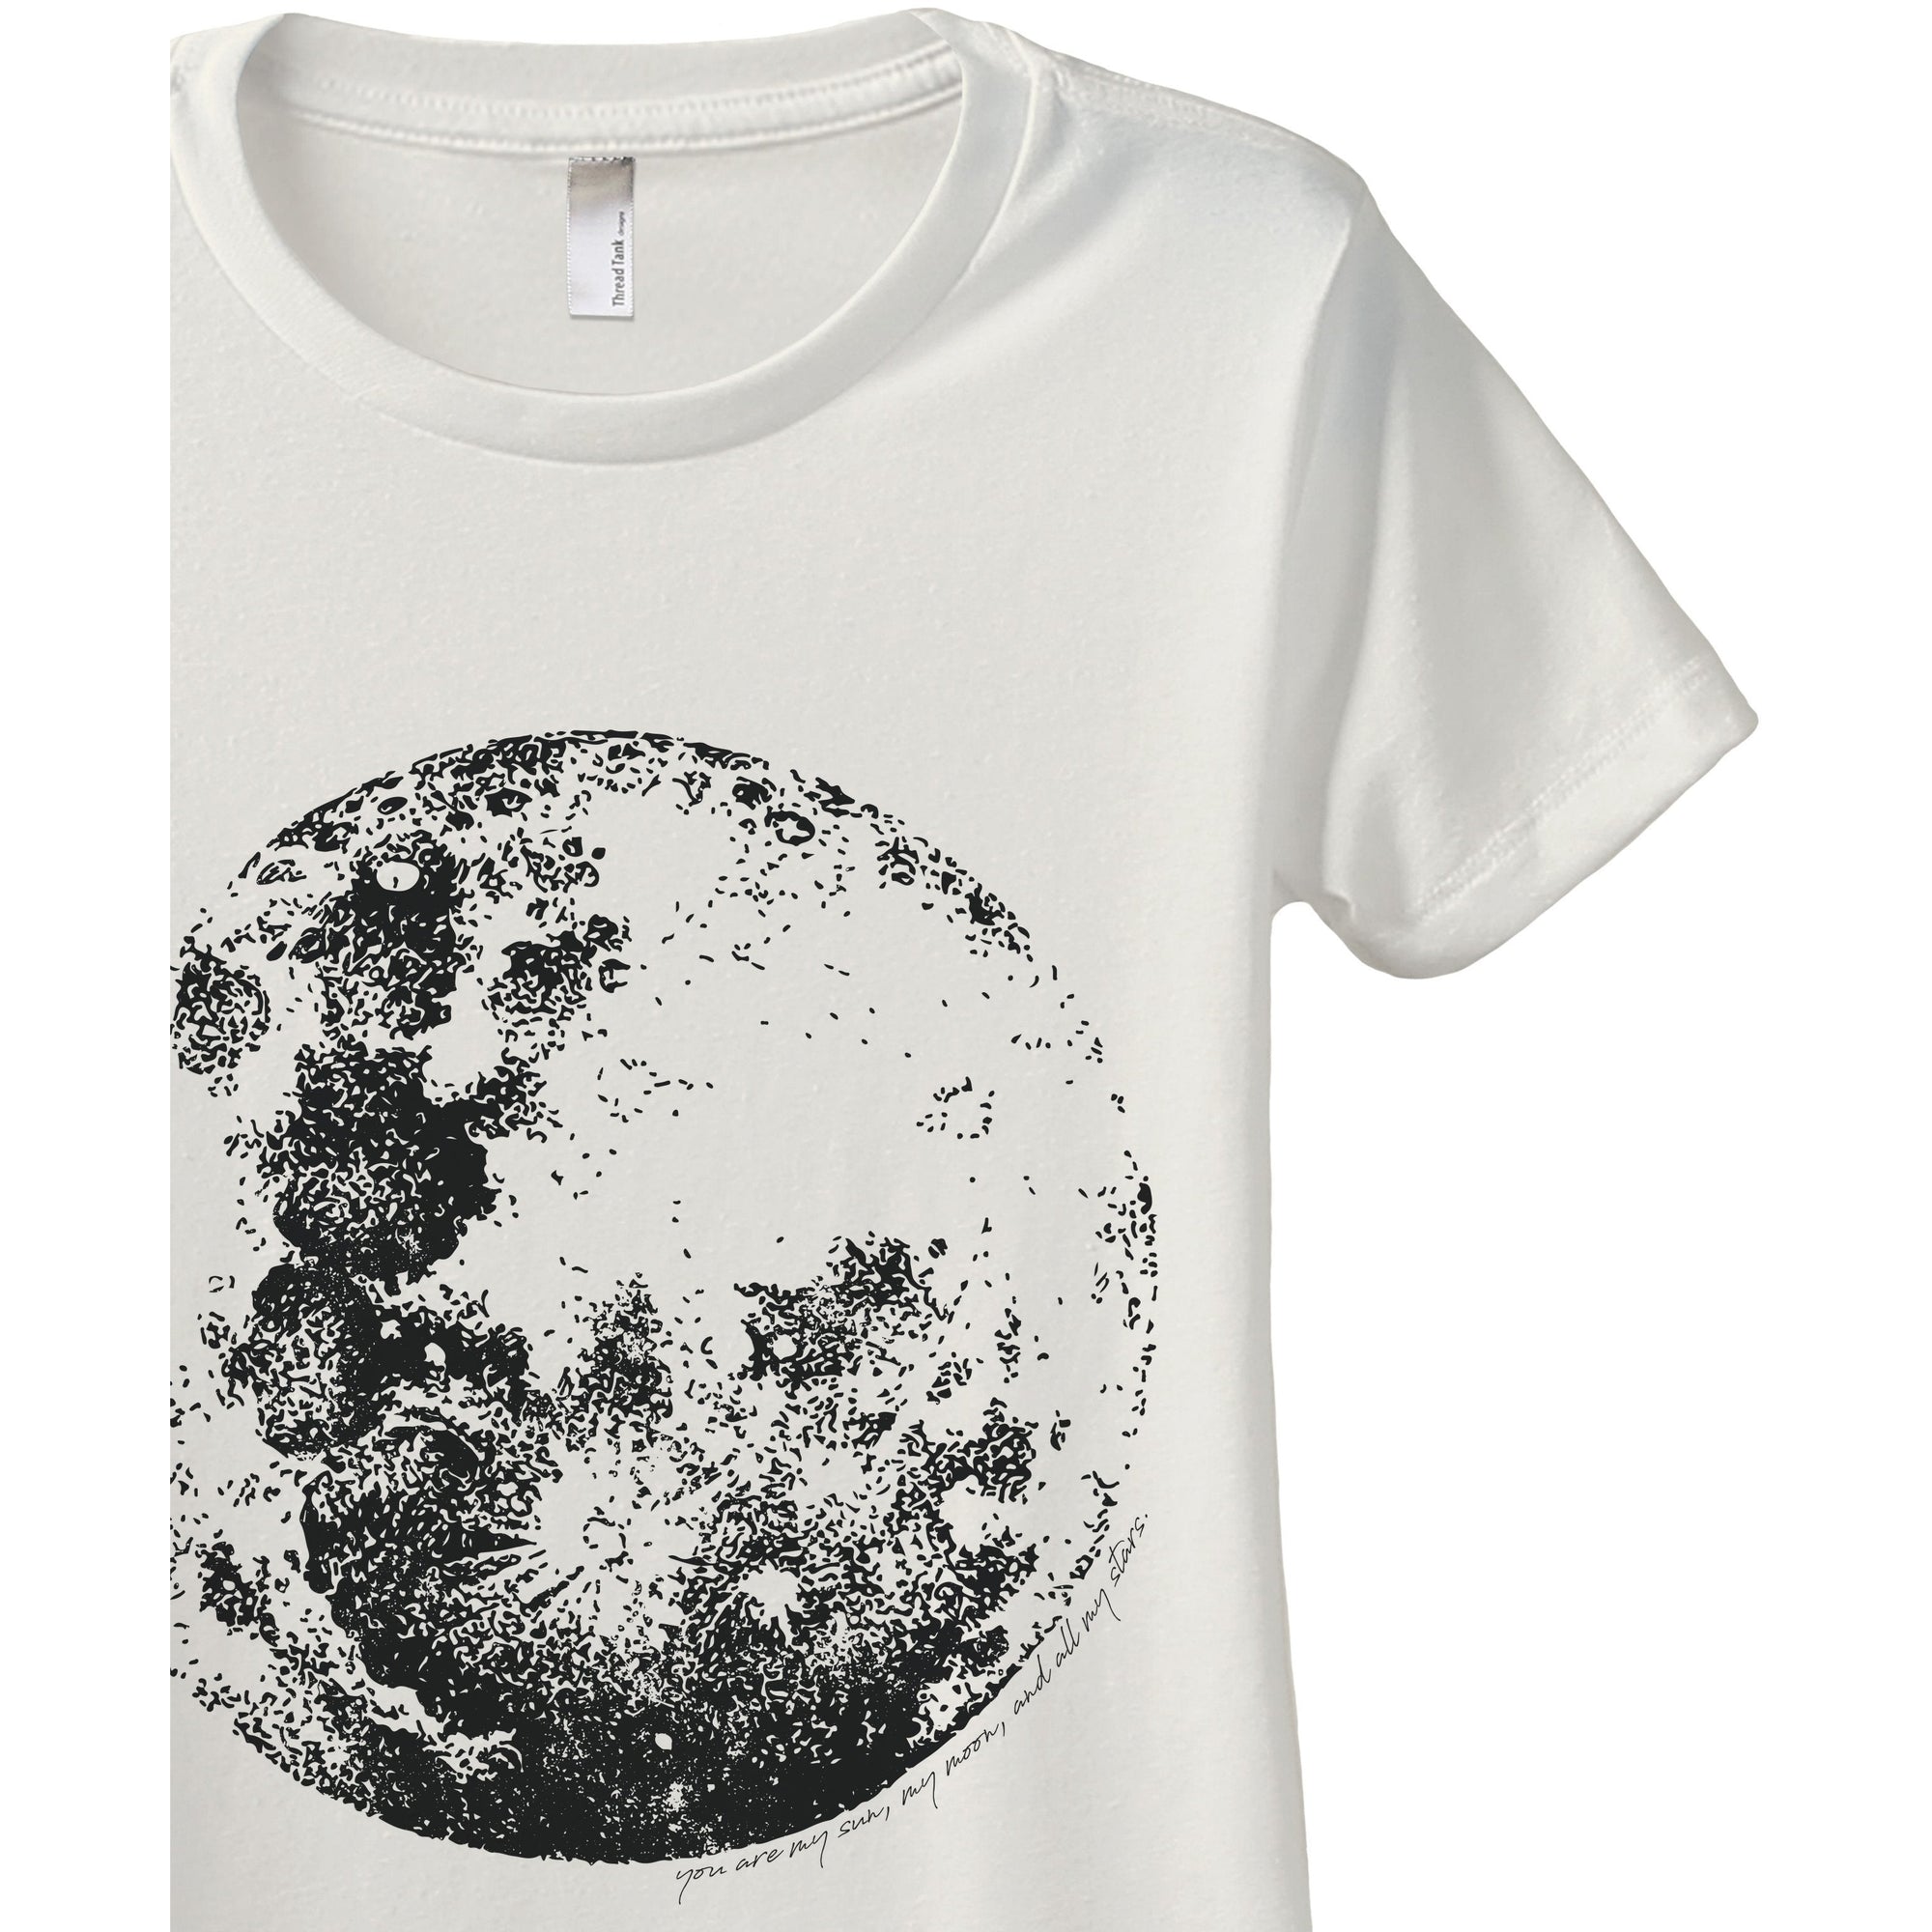 Full Moon Women's Relaxed Crewneck T-Shirt Top Tee Vintage White Zoom Details
